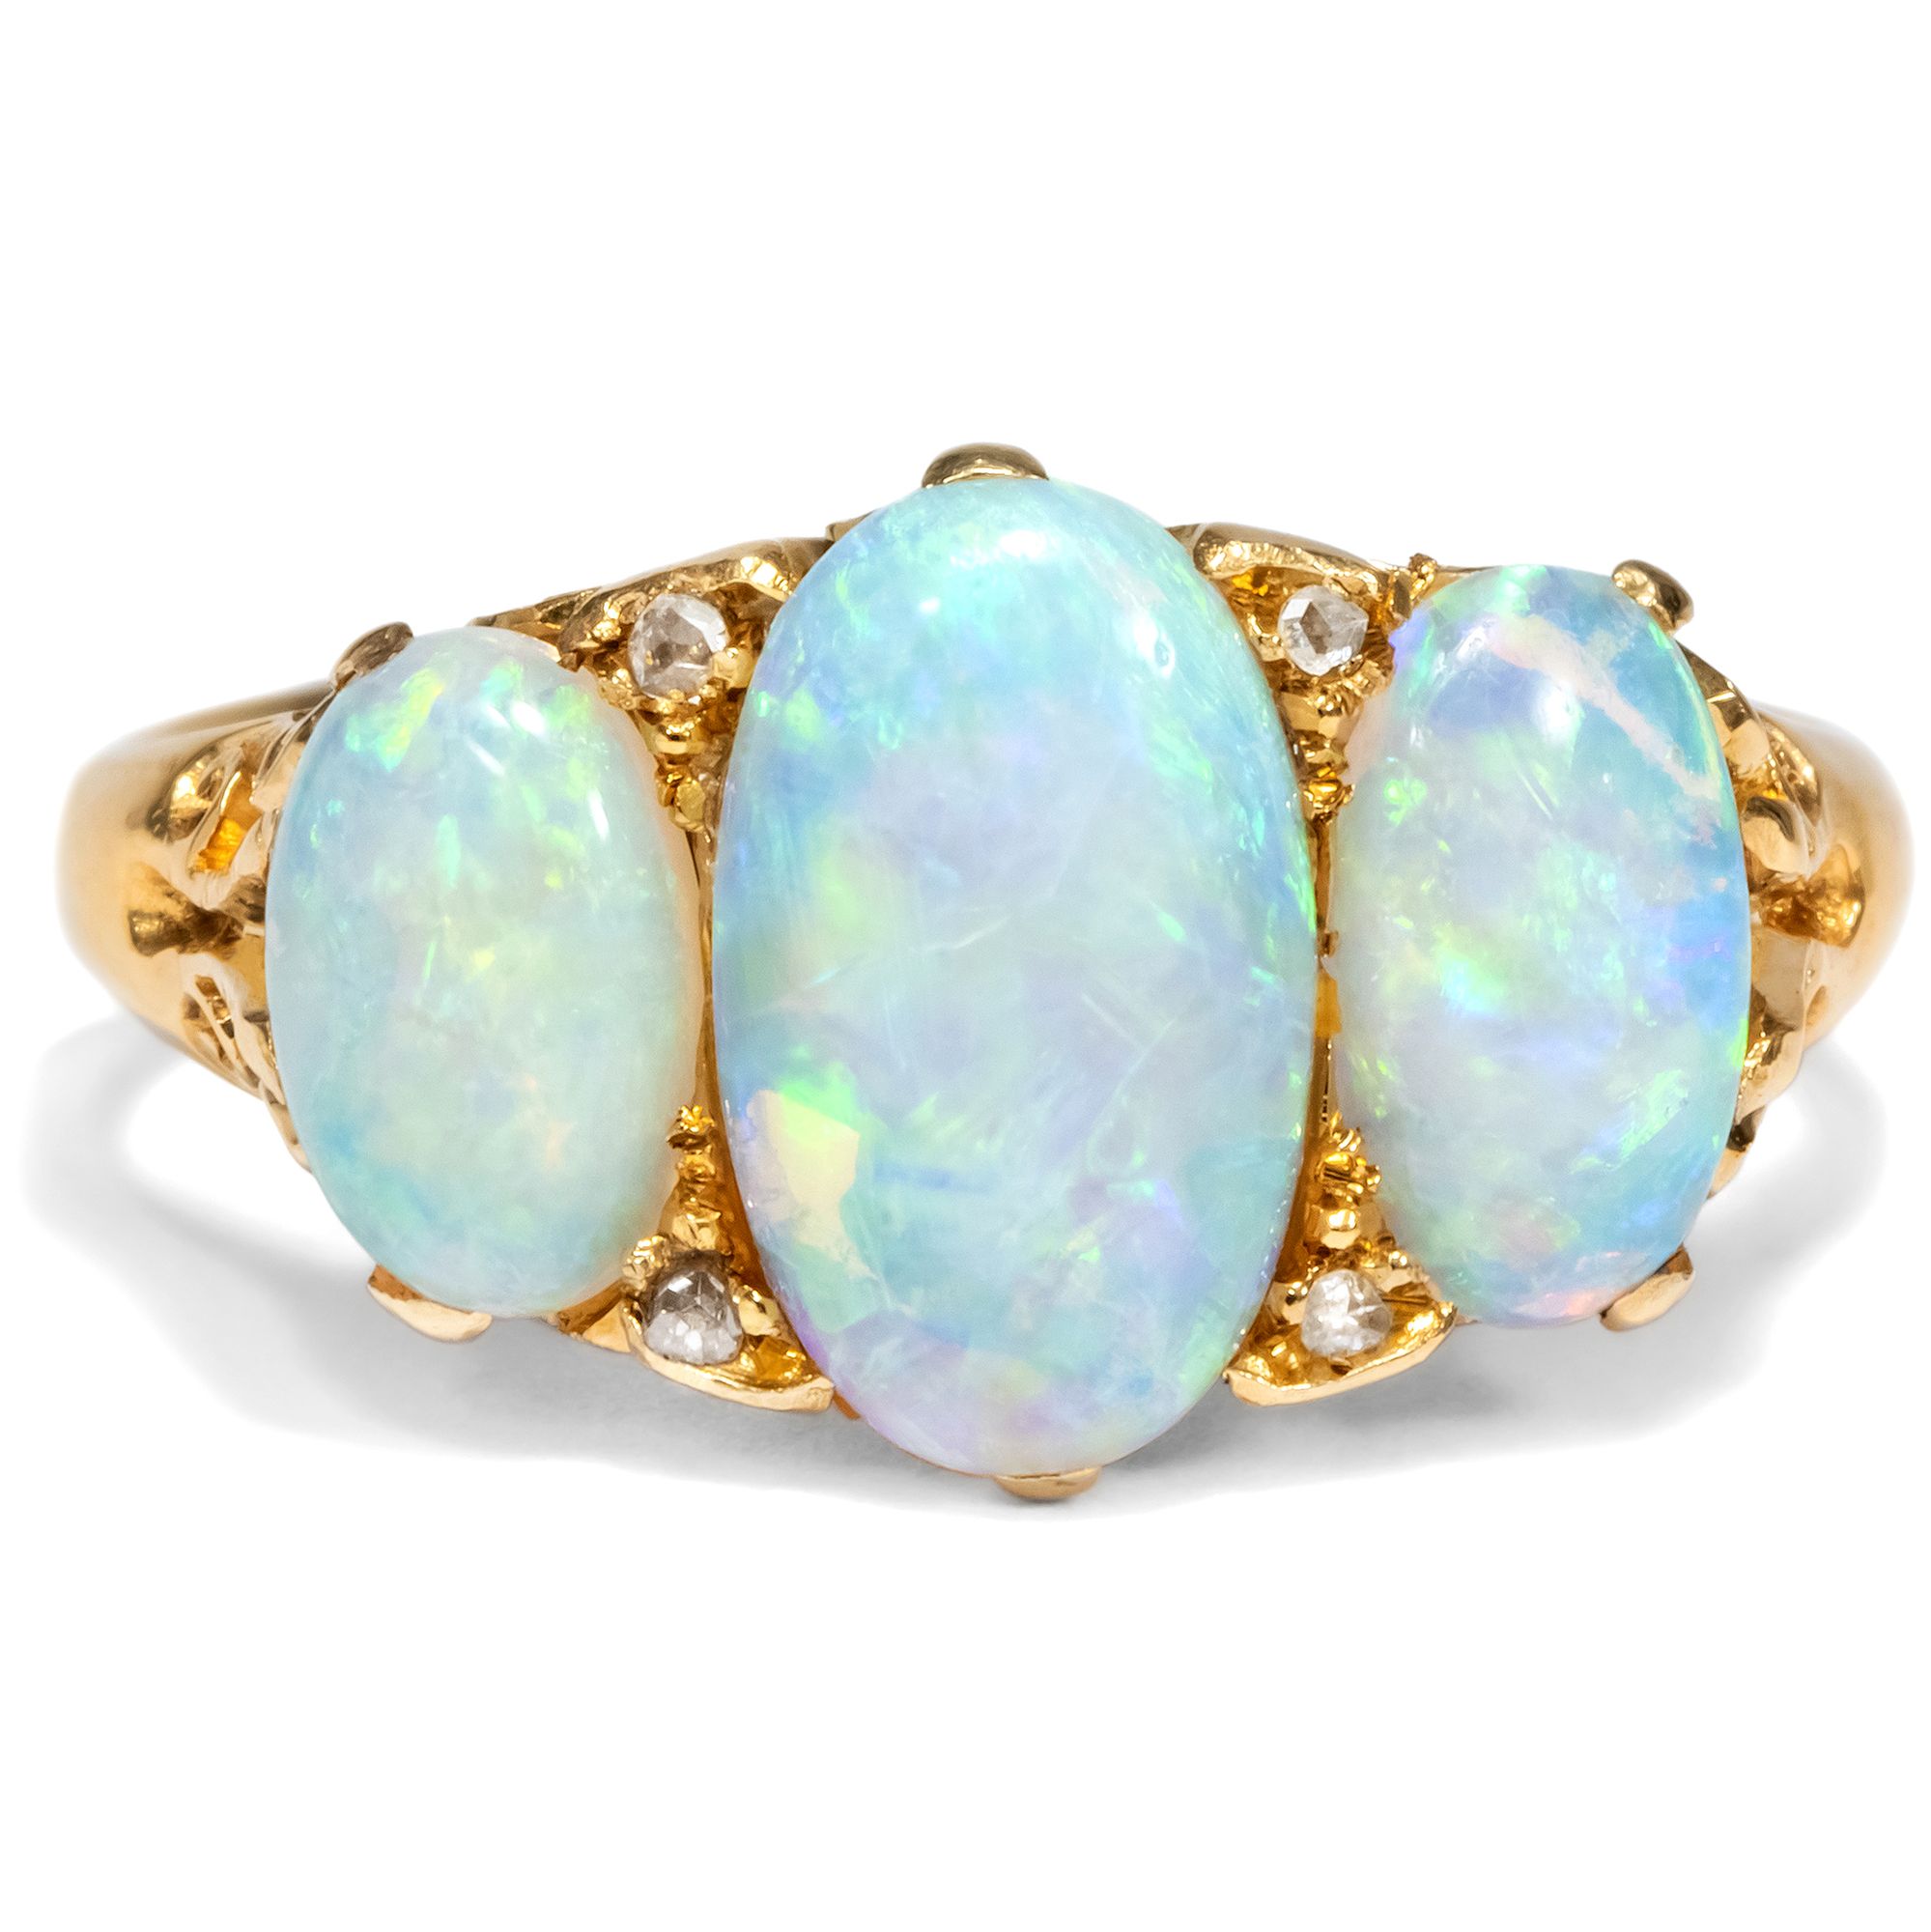 Precious Ring with Australian Opals & Diamonds in Gold, England c. 1900